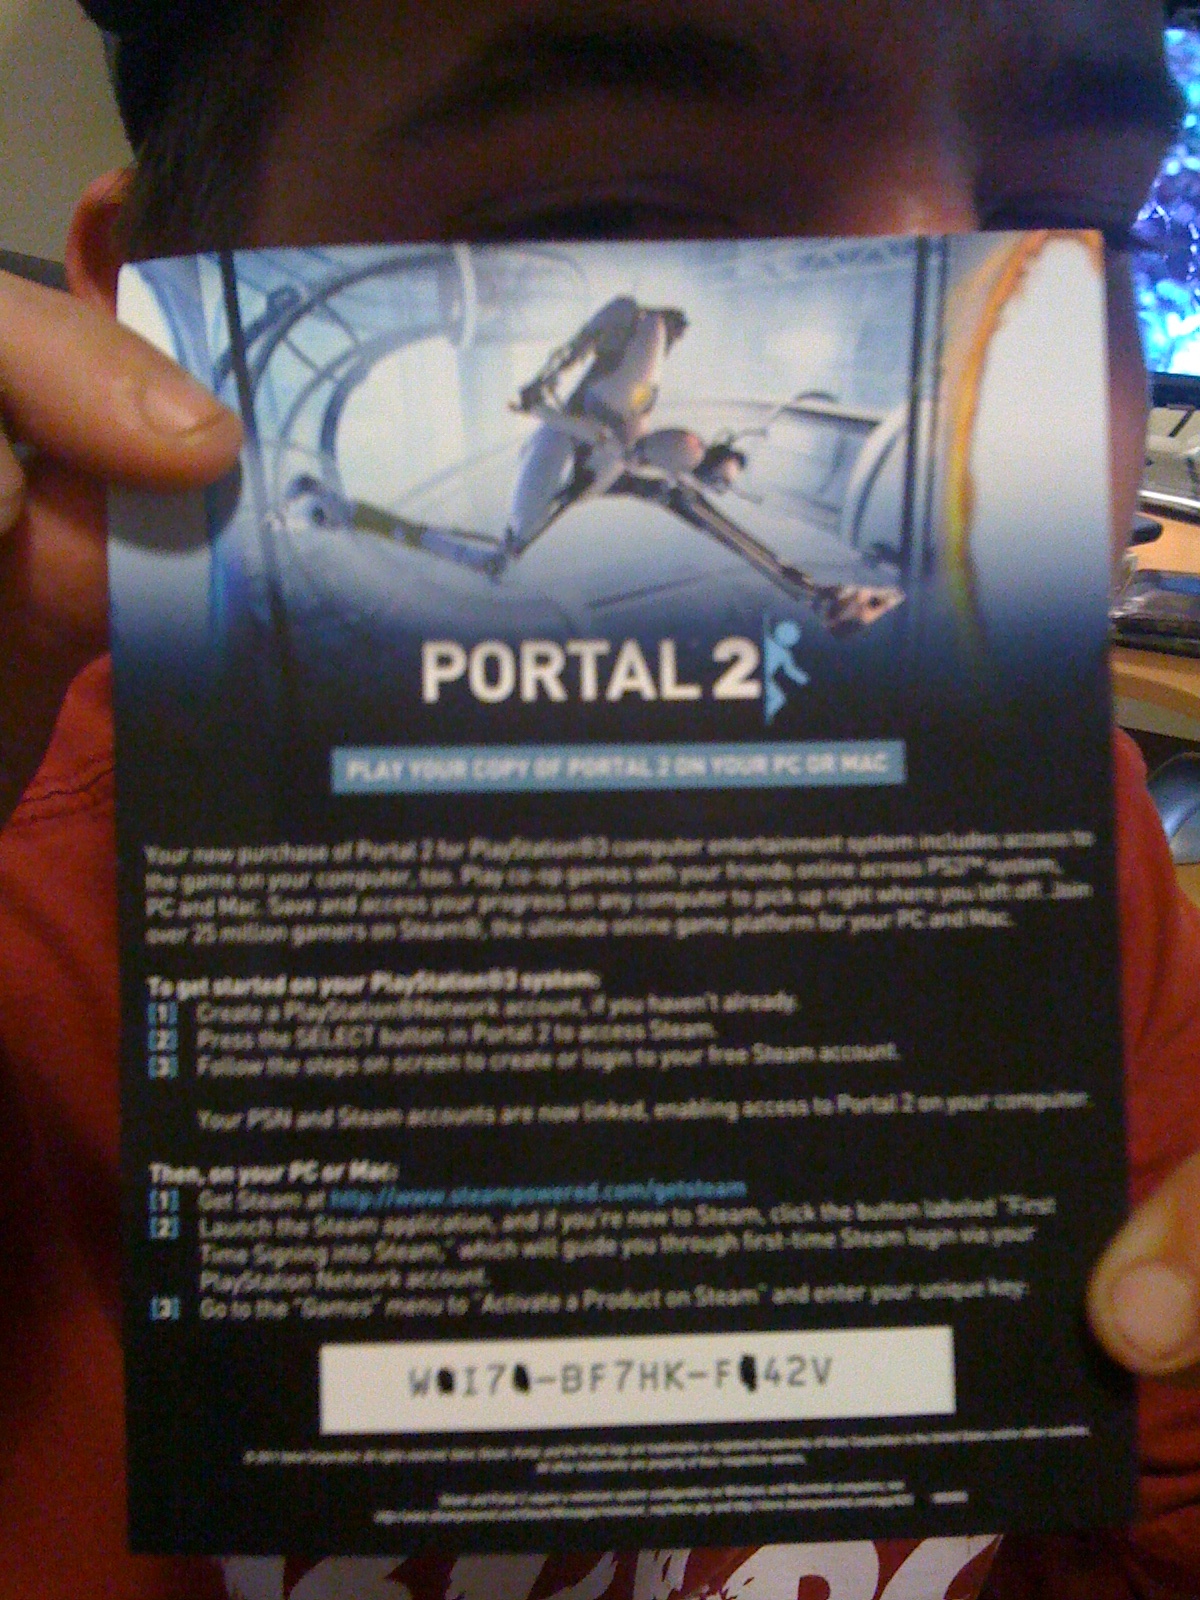 how to get portal 2 for free on steam from ps3